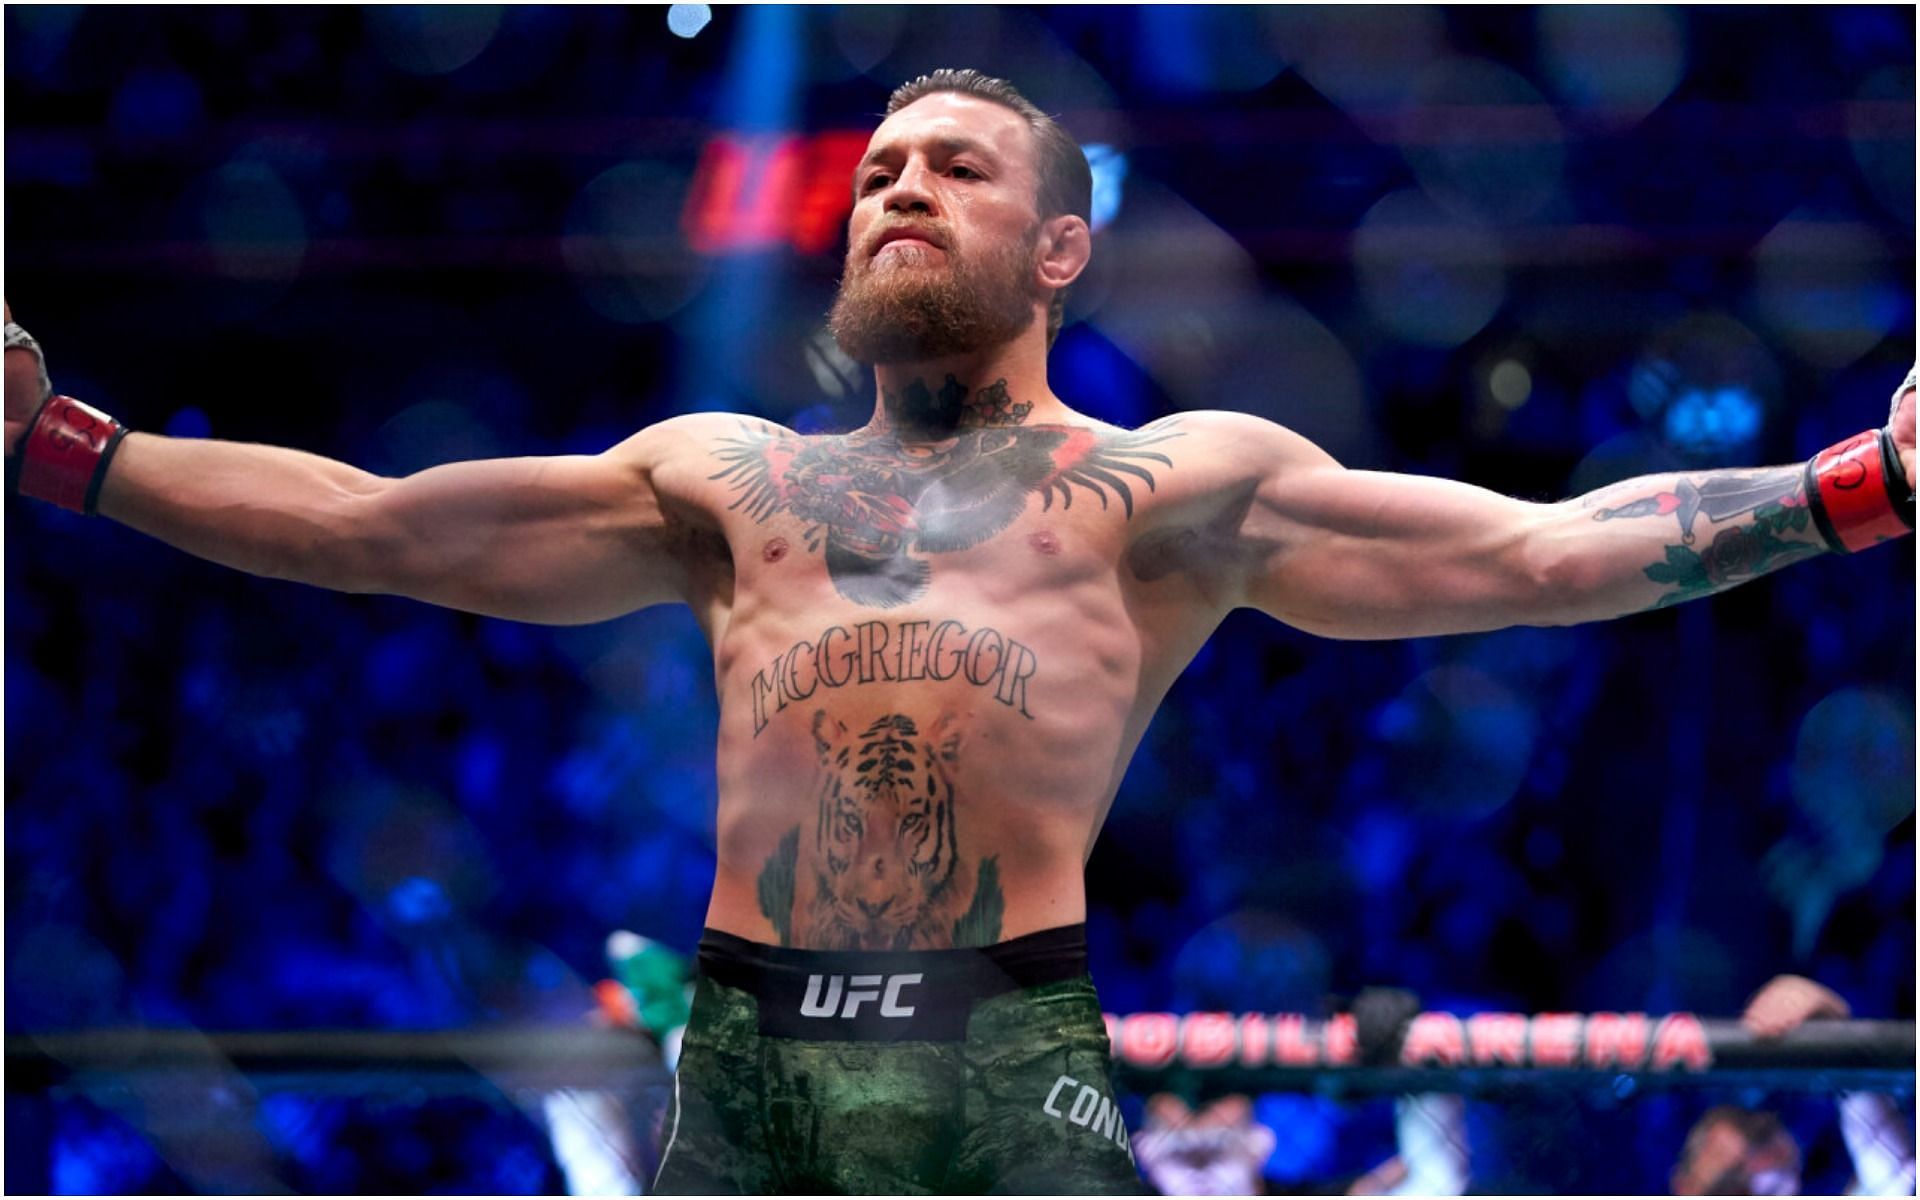 Conor McGregor holds many UFC records